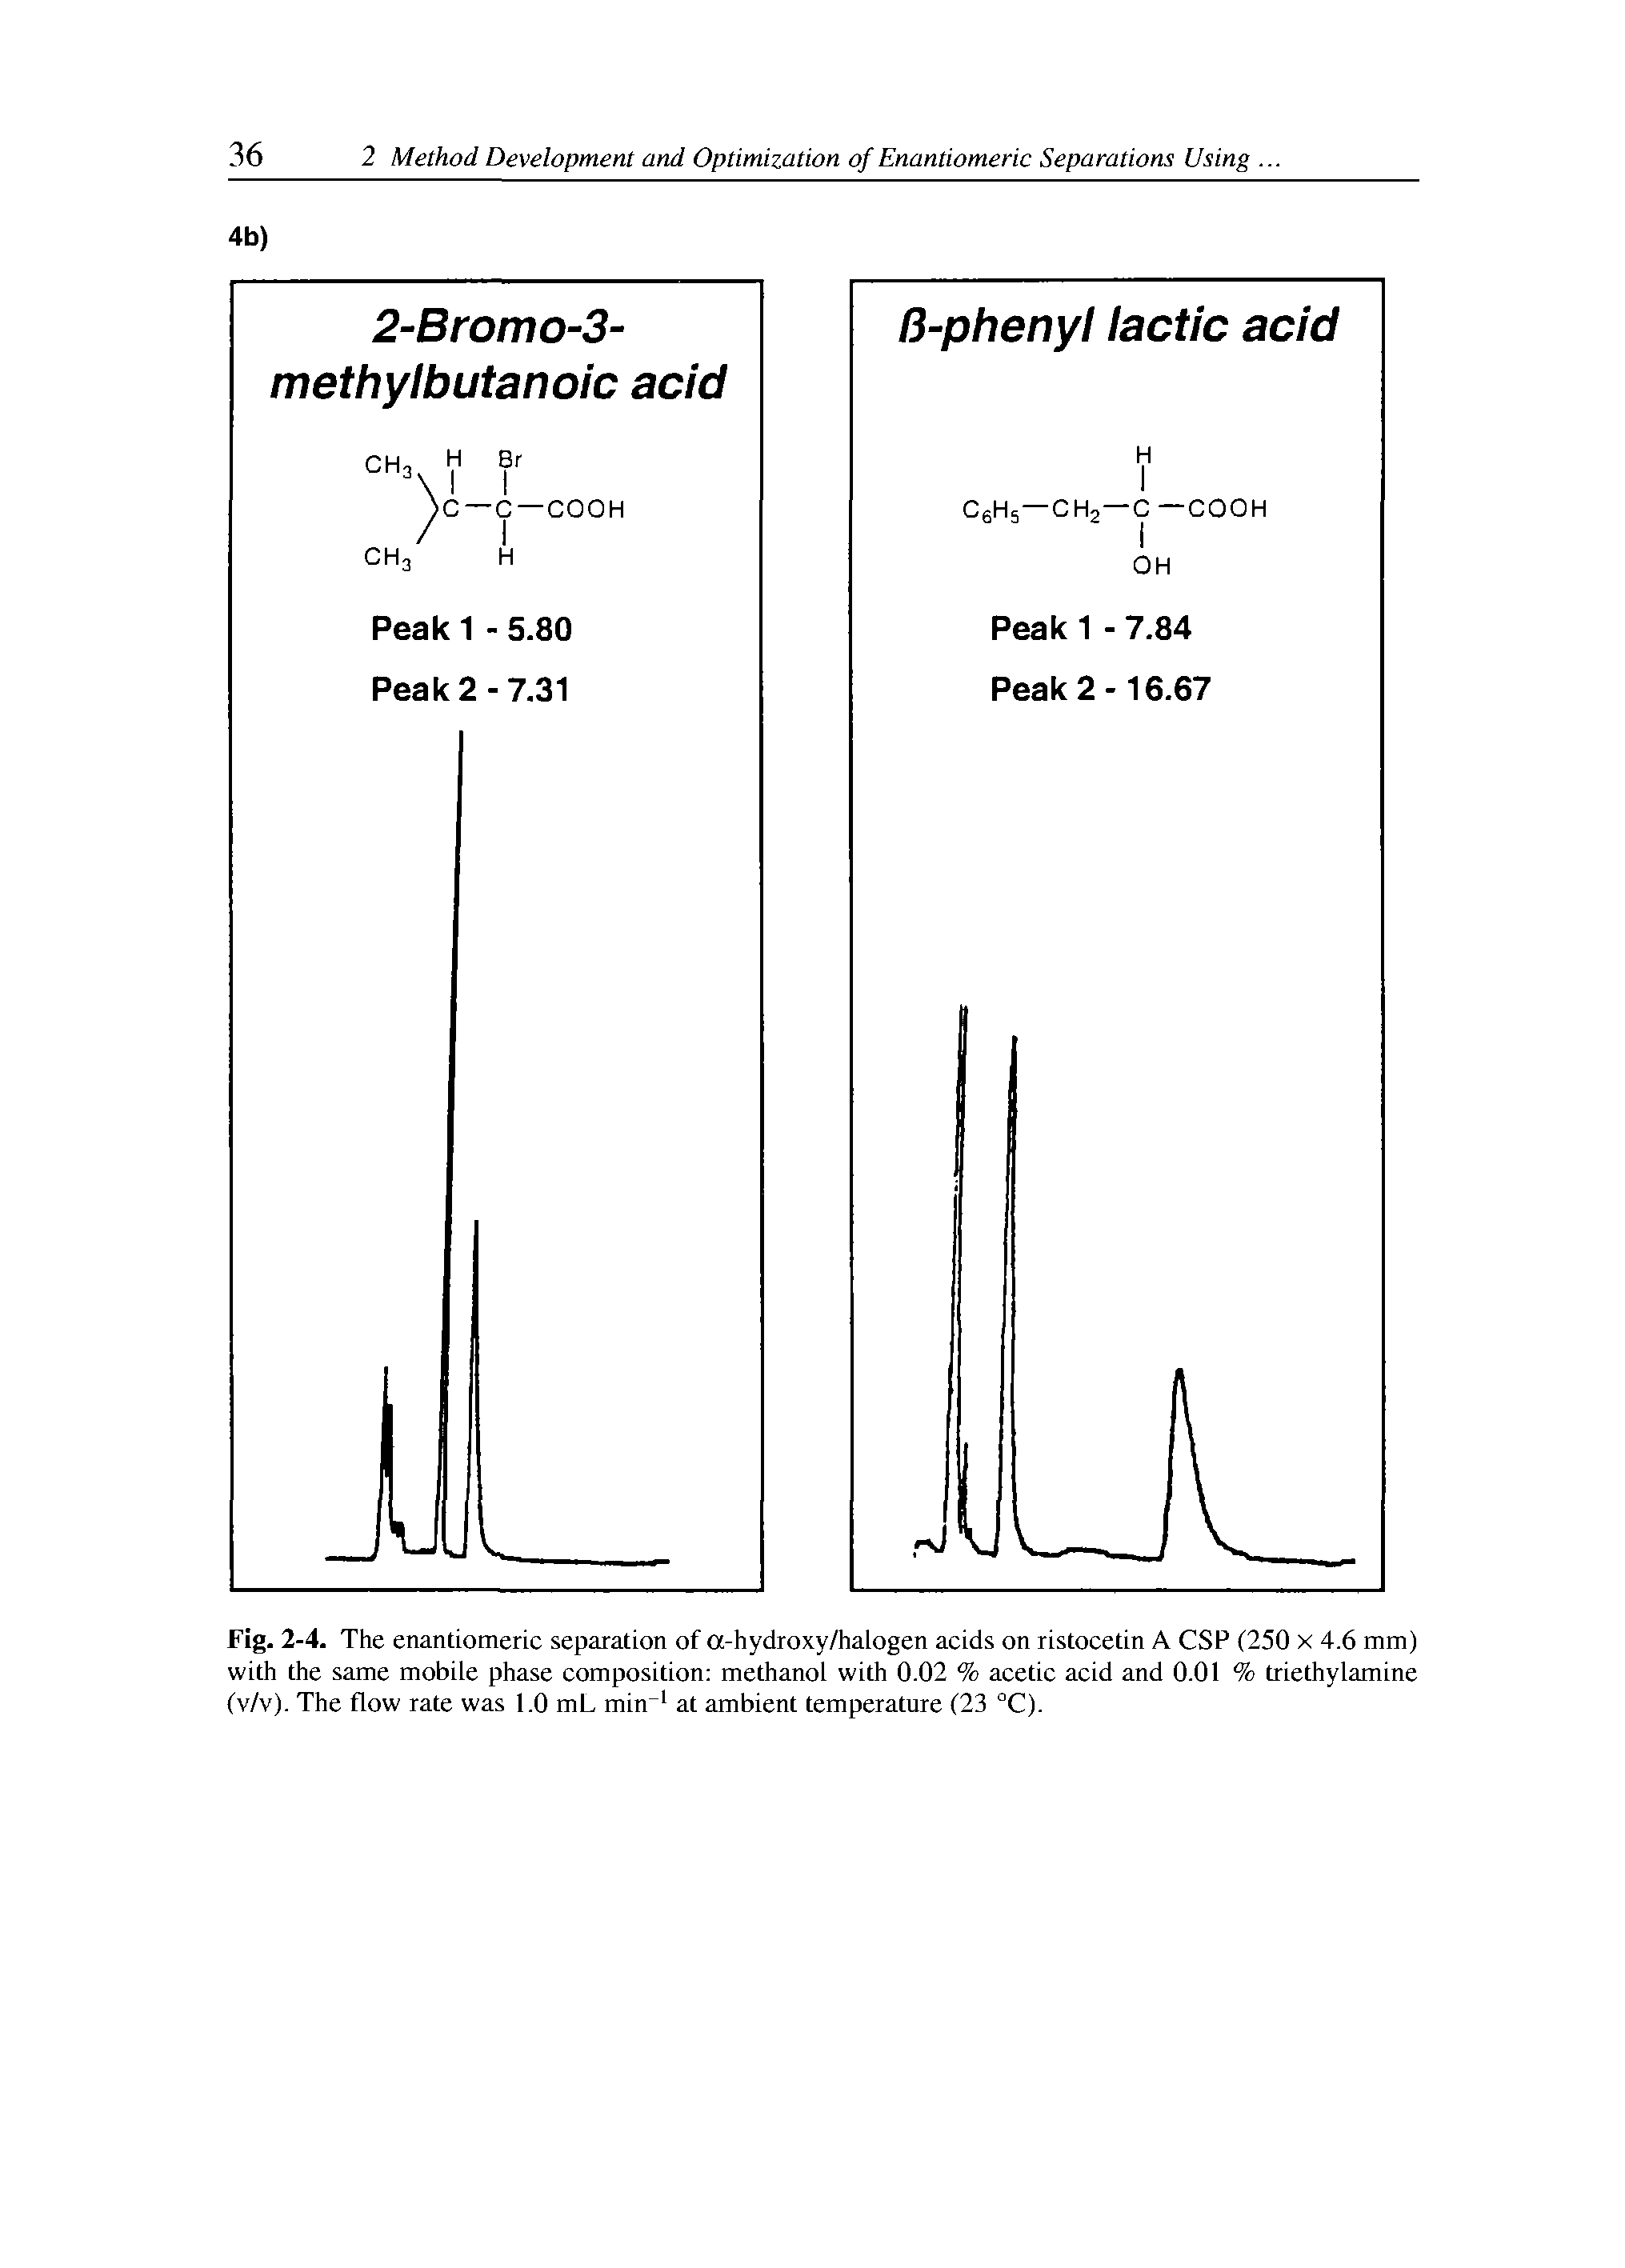 Fig. 2-4. The enantiomeric separation of a-hydroxy/halogen acids on ristocetin A CSP (250 x 4.6 mm) with the same mobile phase composition methanol with 0.02 % acetic acid and 0.01 % triethylamine (v/v). The flow rate was 1.0 mL min at ambient temperature (23 °C).